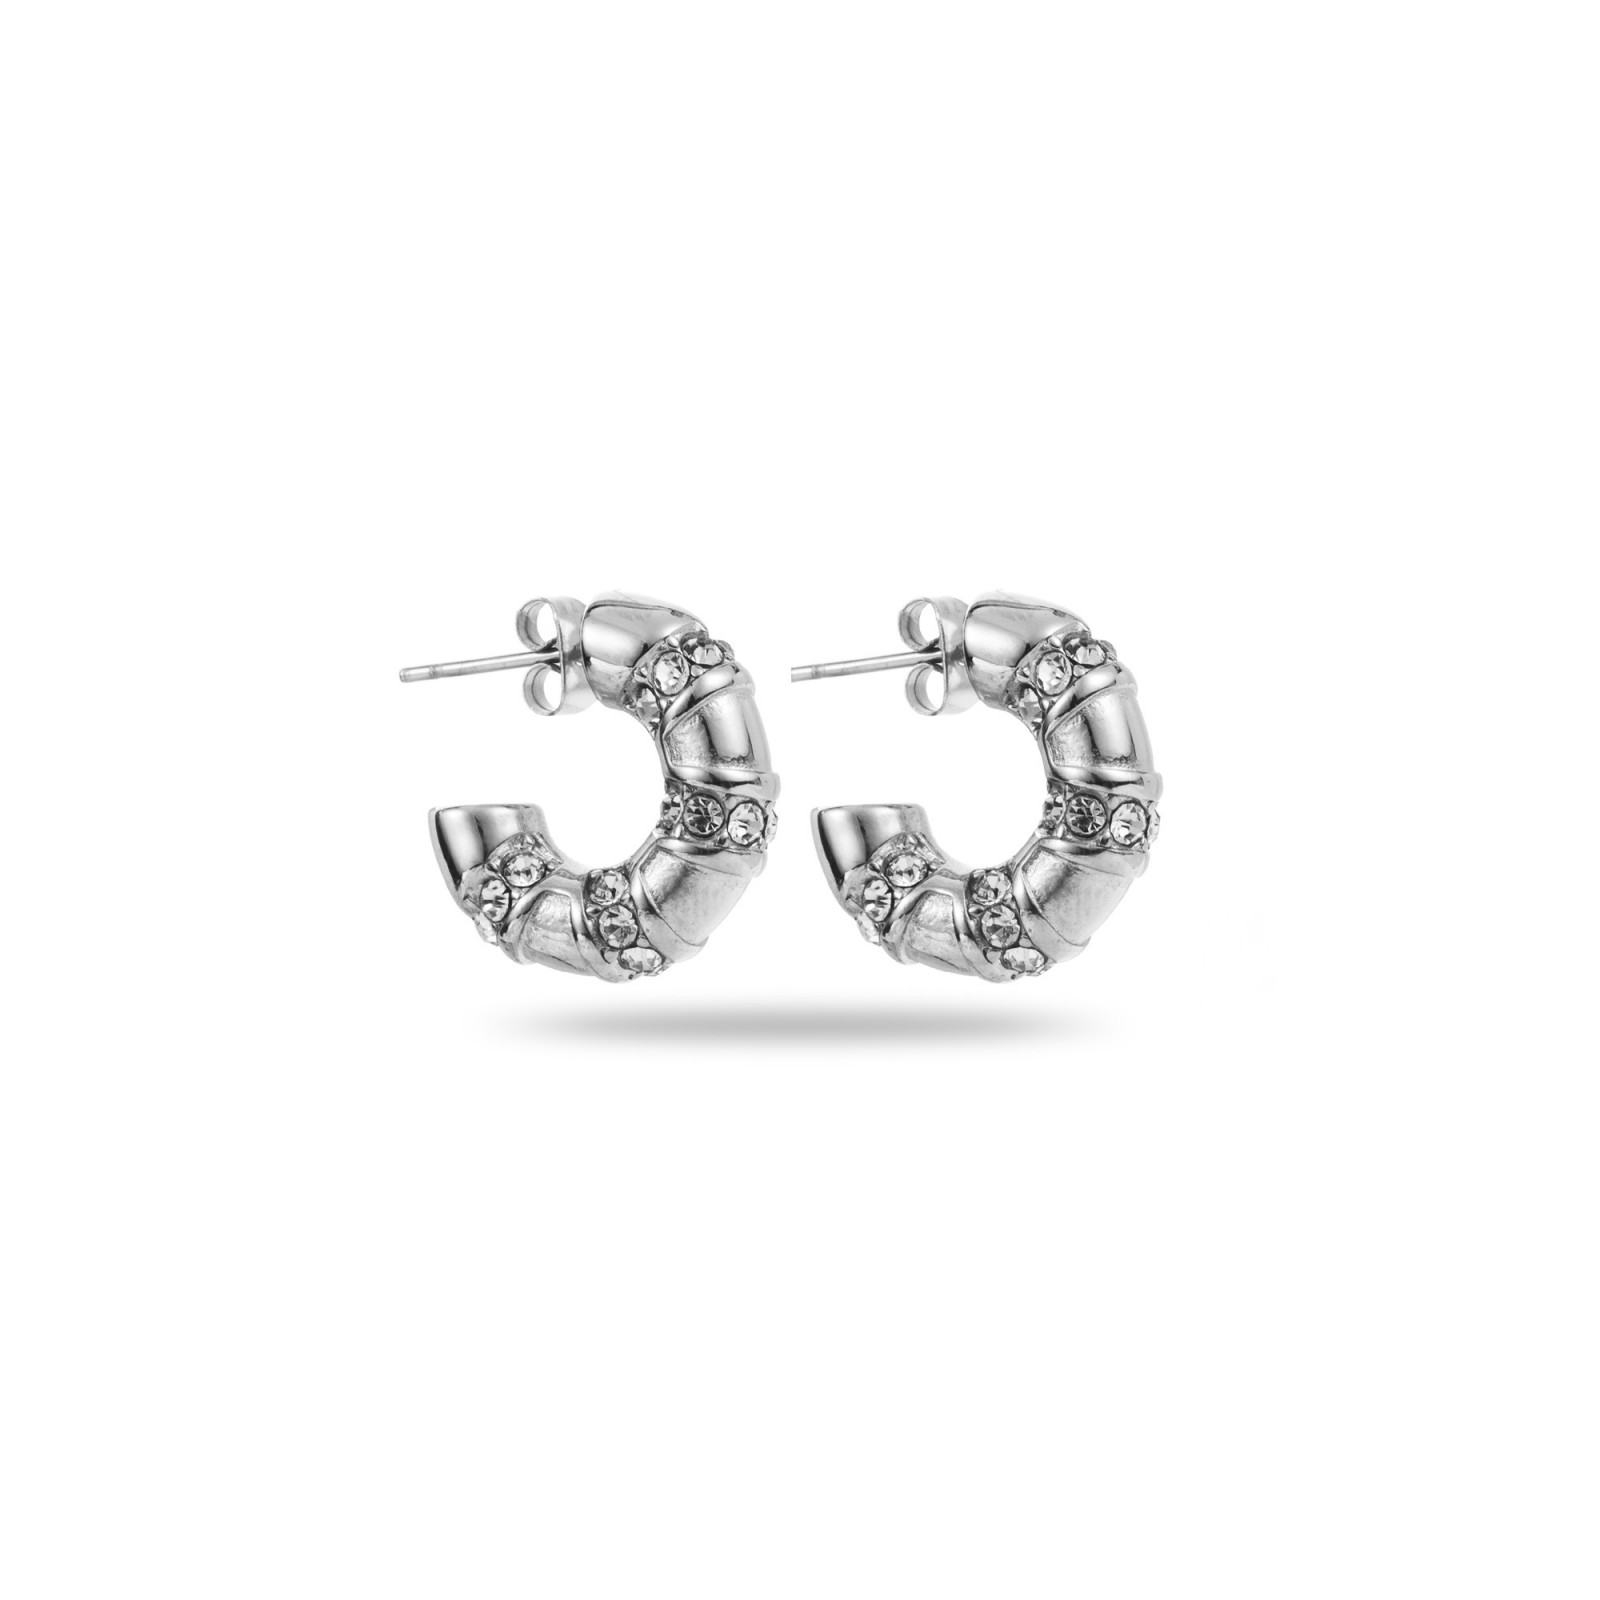 Rhinestone Paved Small Hoops Earrings Color:Silver